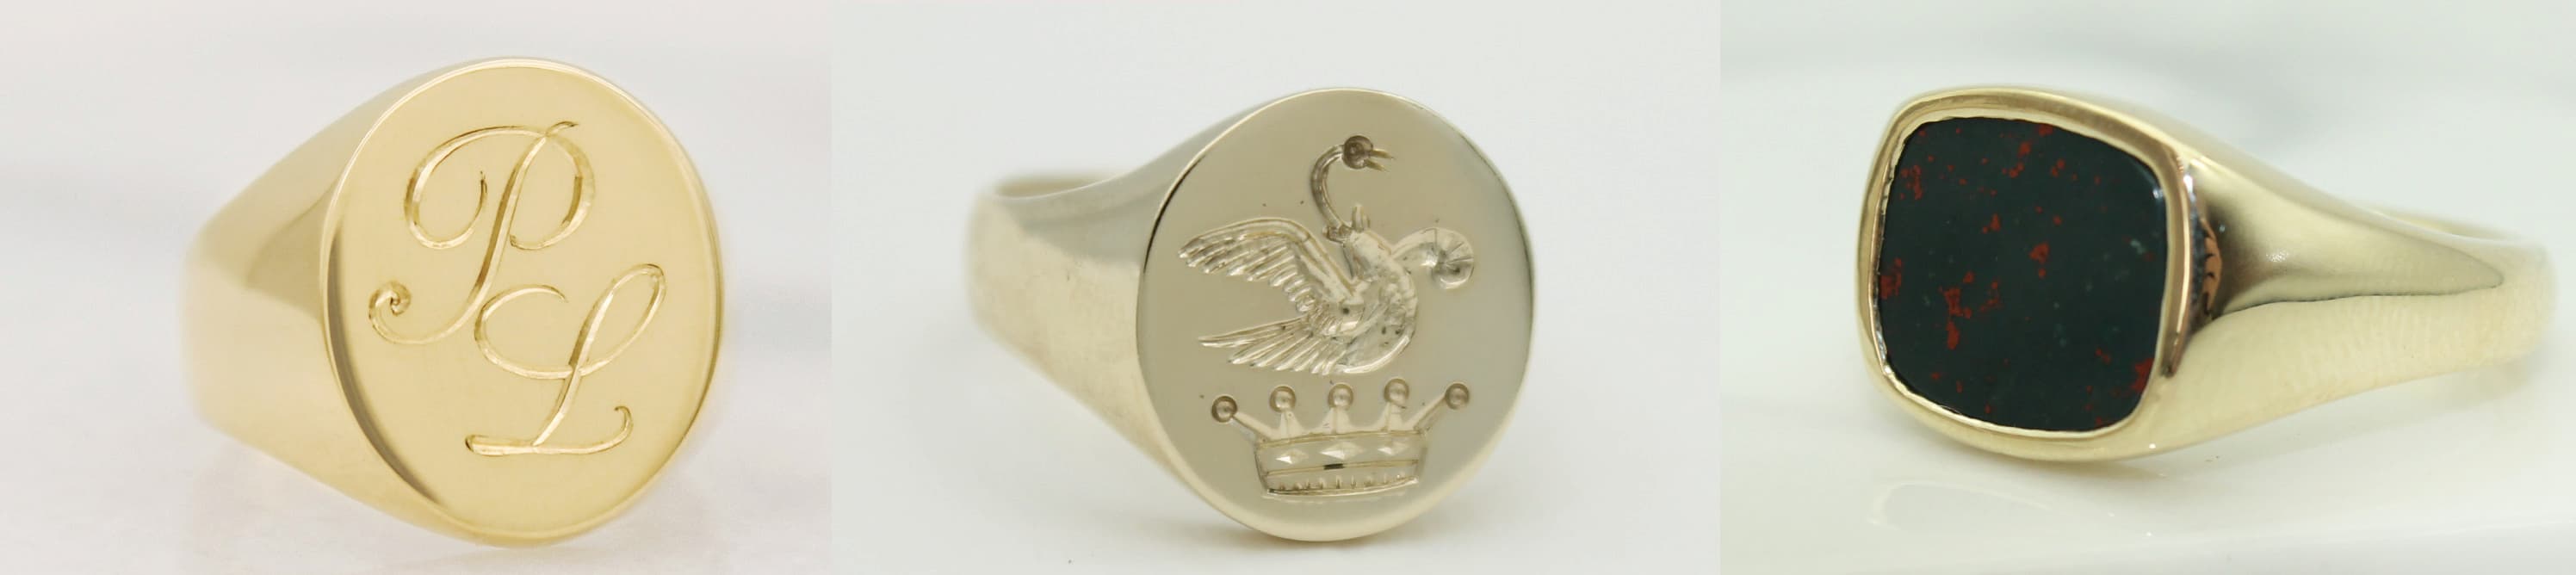 Ideas for signet ring engravings for fathers day gifts.